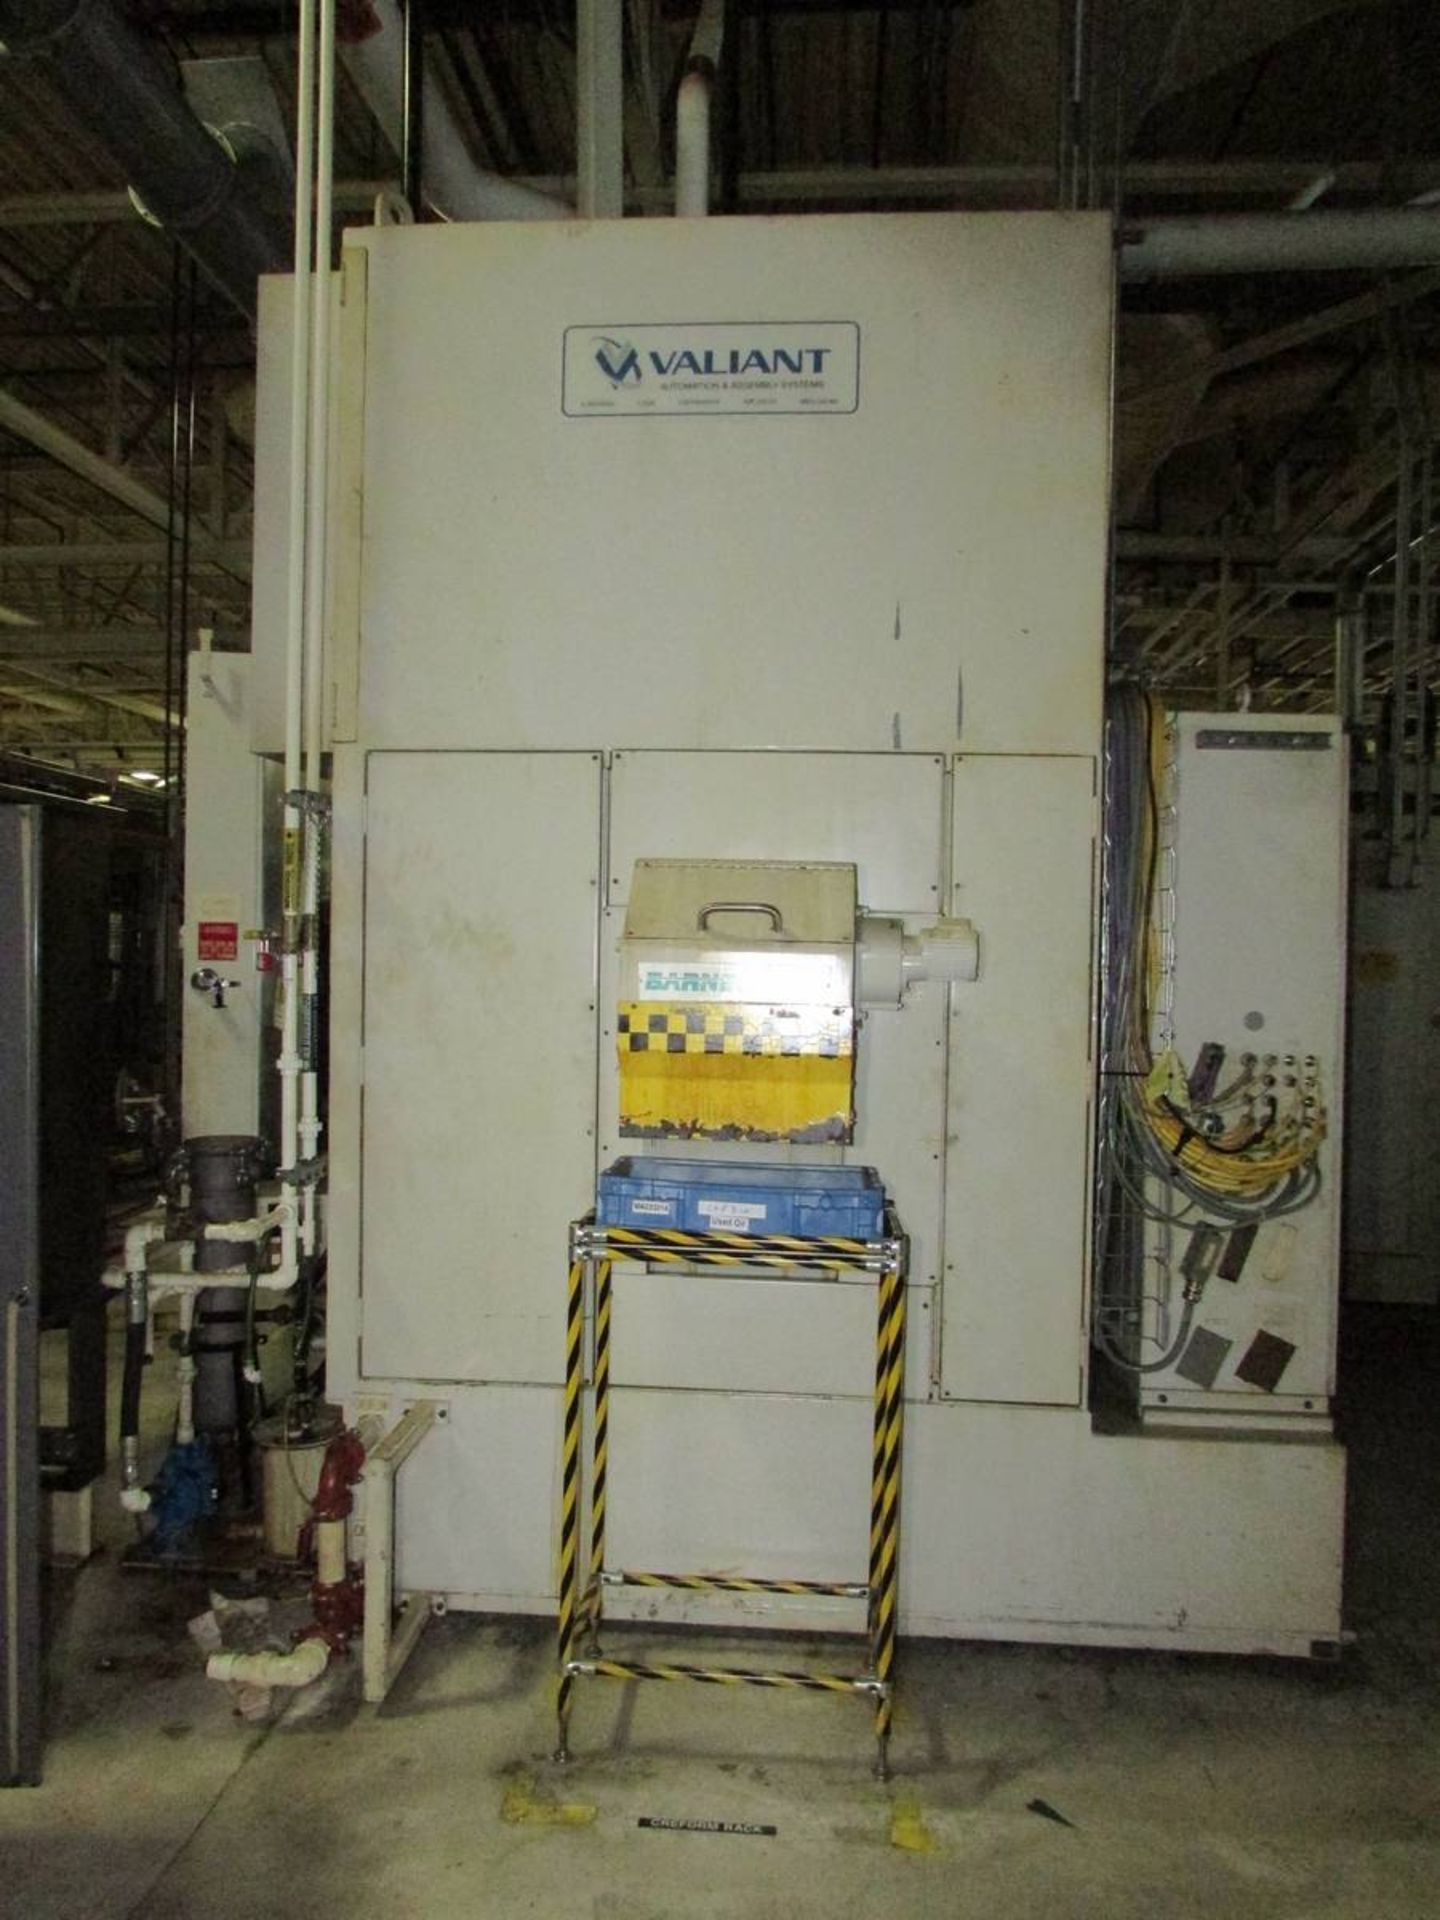 2007 Valiant Robotic Twin Pallet Automatic High-Pressure Parts Deburr and Wash Machine - Image 17 of 33